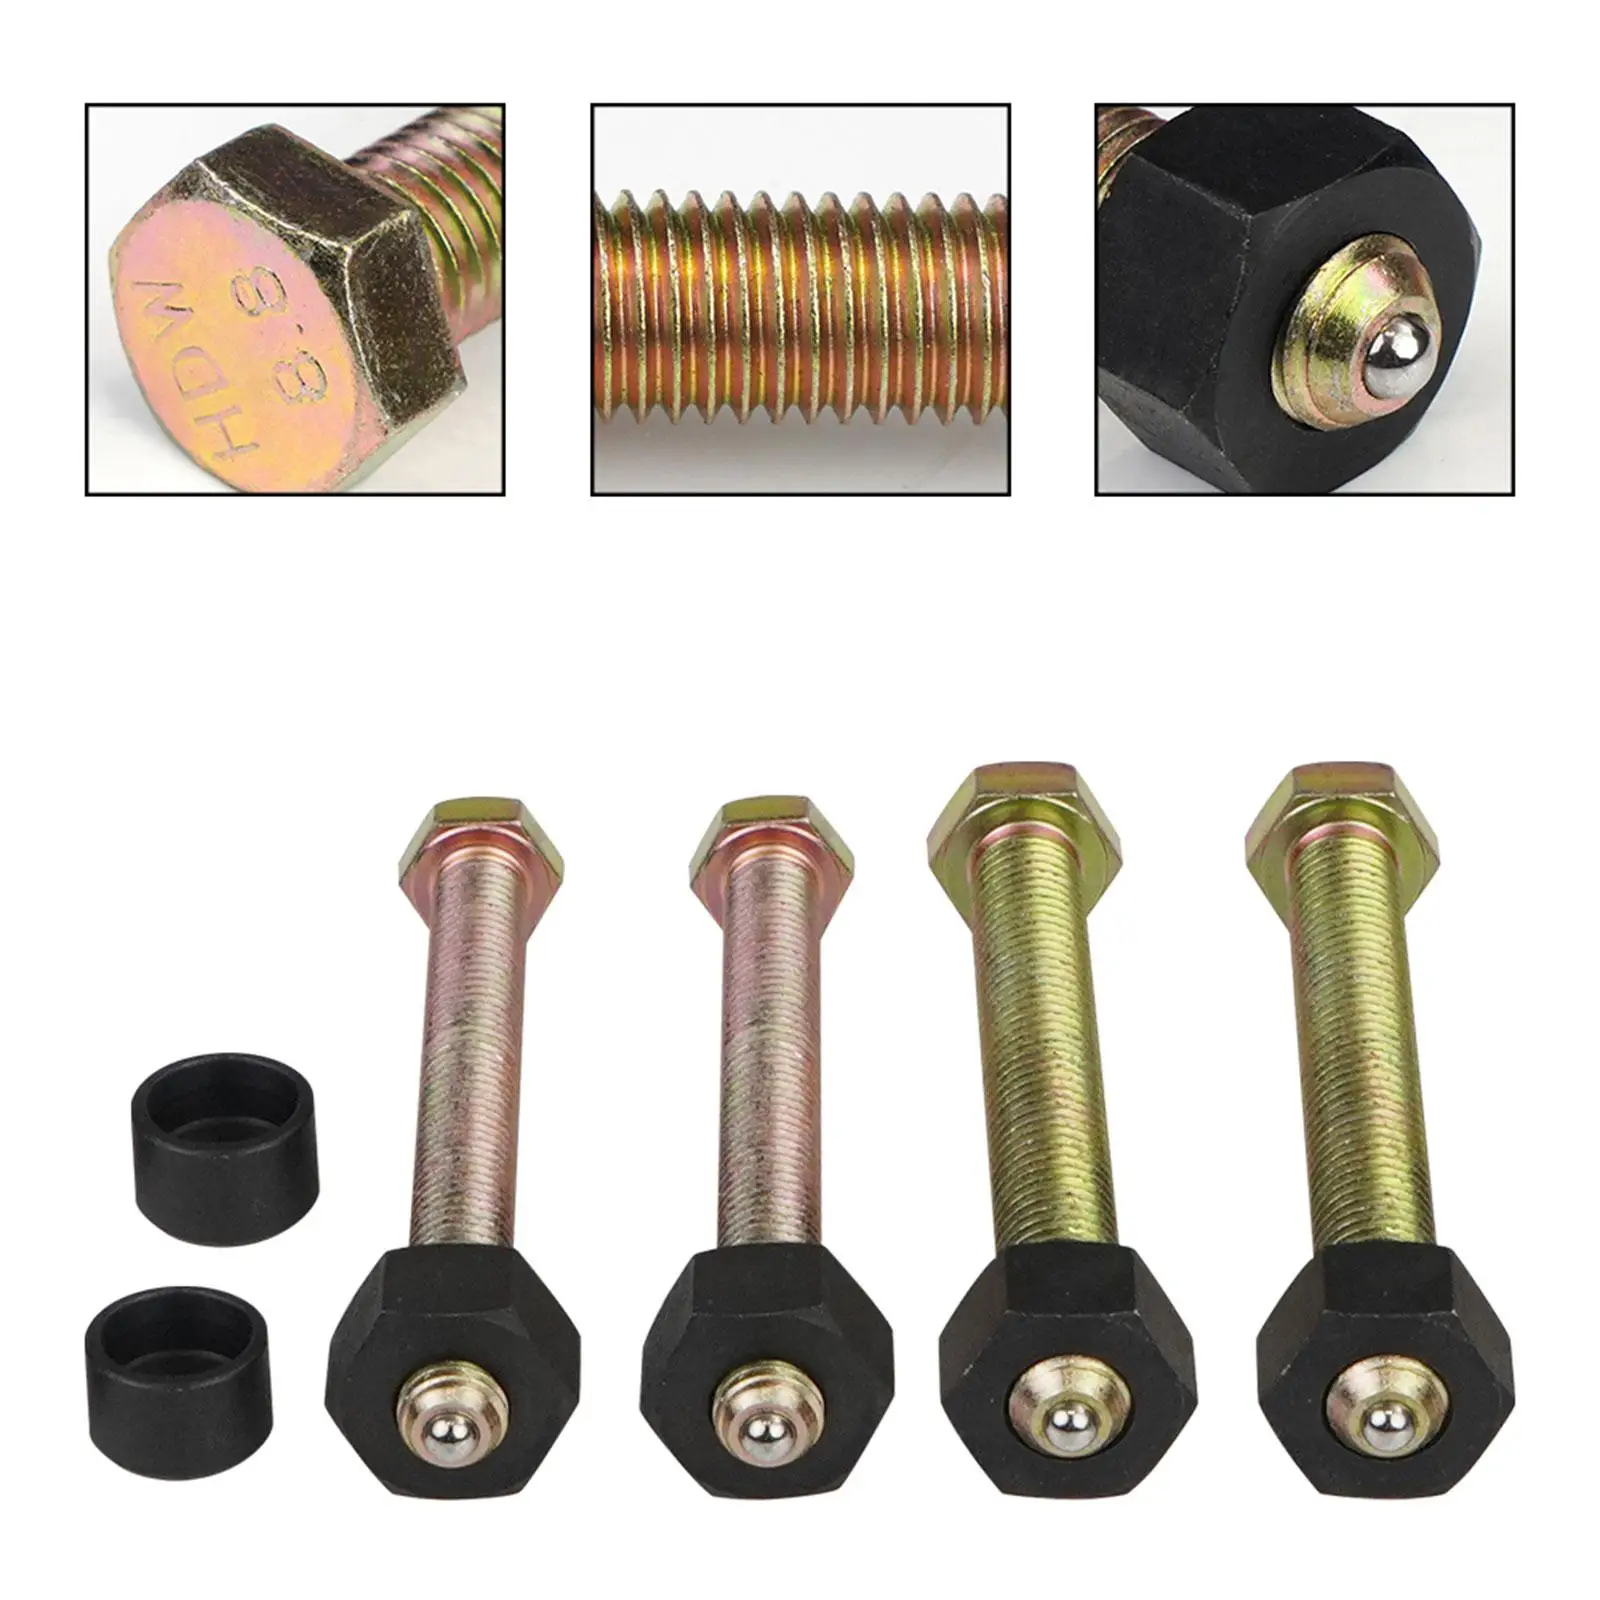 78834 Repair Parts Metal Bolts Replacement Impact Rated Hub Removal Bolt Set